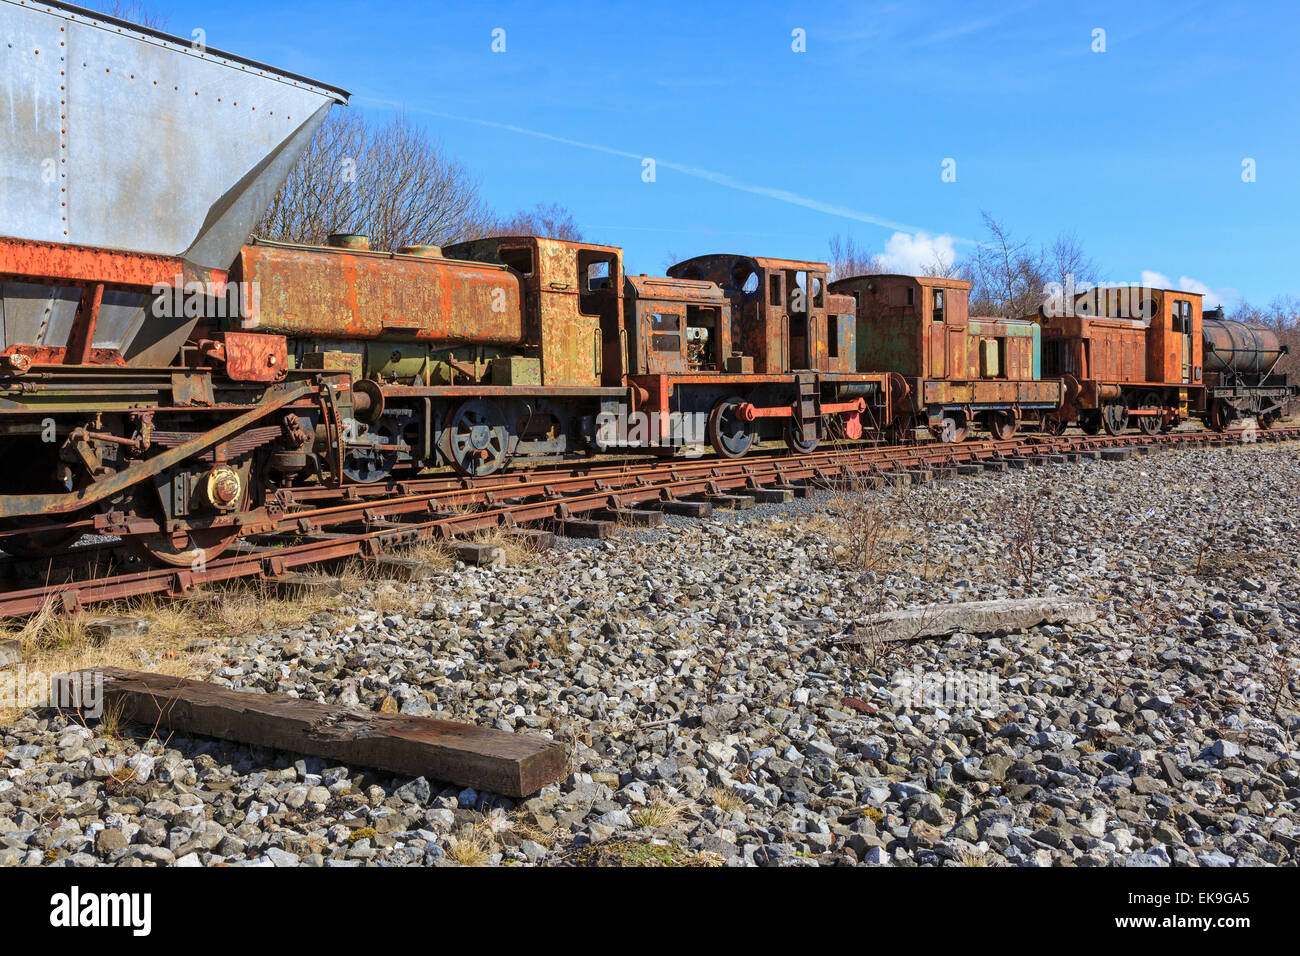 Old and abandoned rusting steam trains and railway carriages, Ayrshire, Scotland, UK Stock Photo